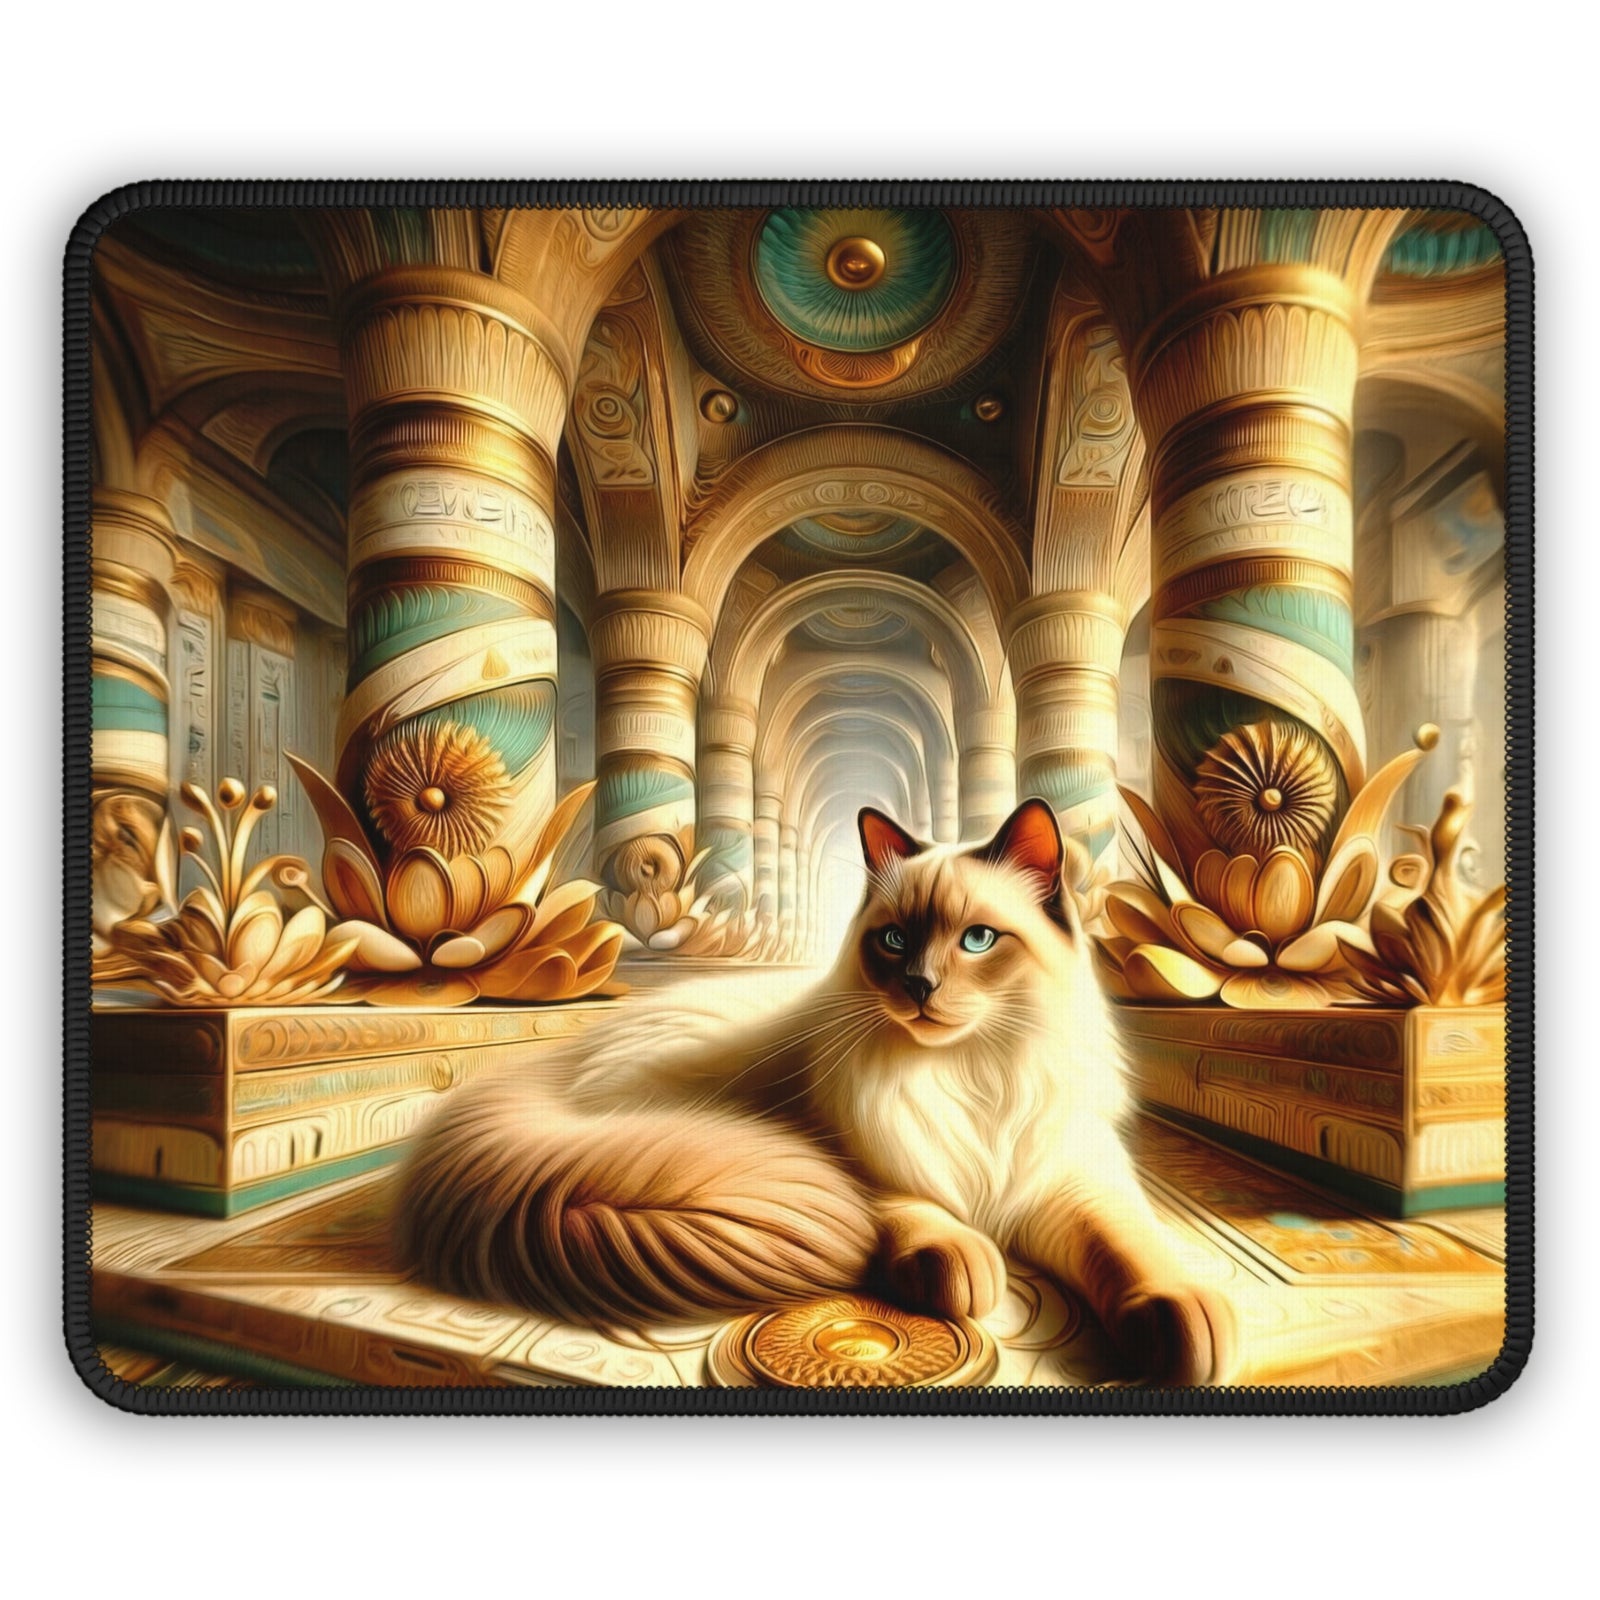 The Siamese's Serene Sanctuary Gaming Mouse Pad